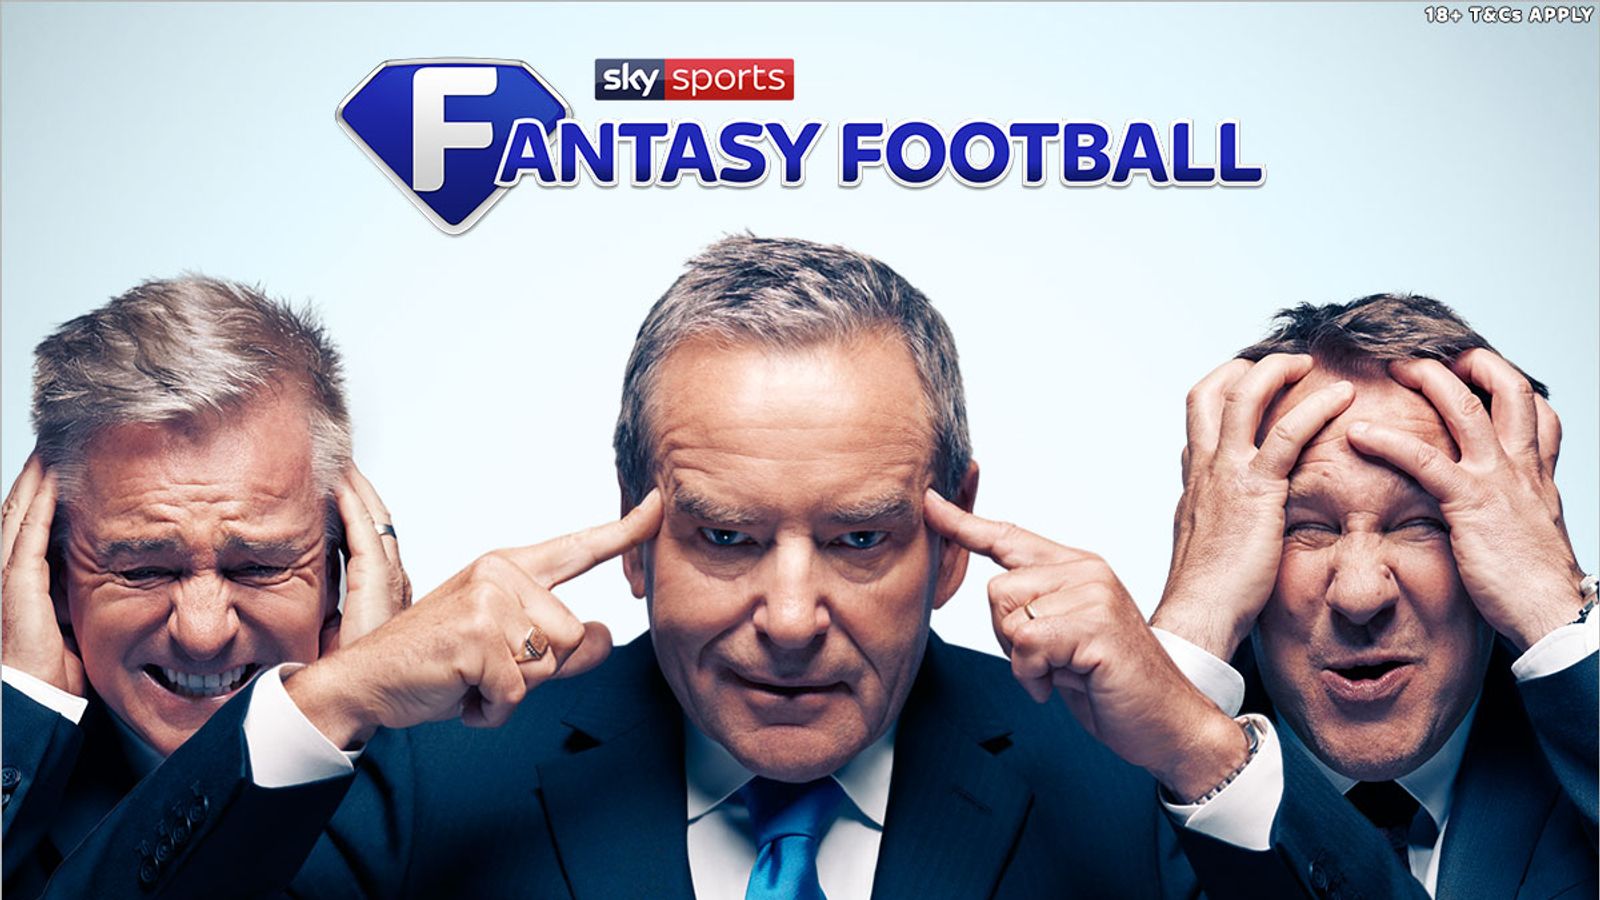 Sky Sports Fantasy Football: Five tips for success from the champion